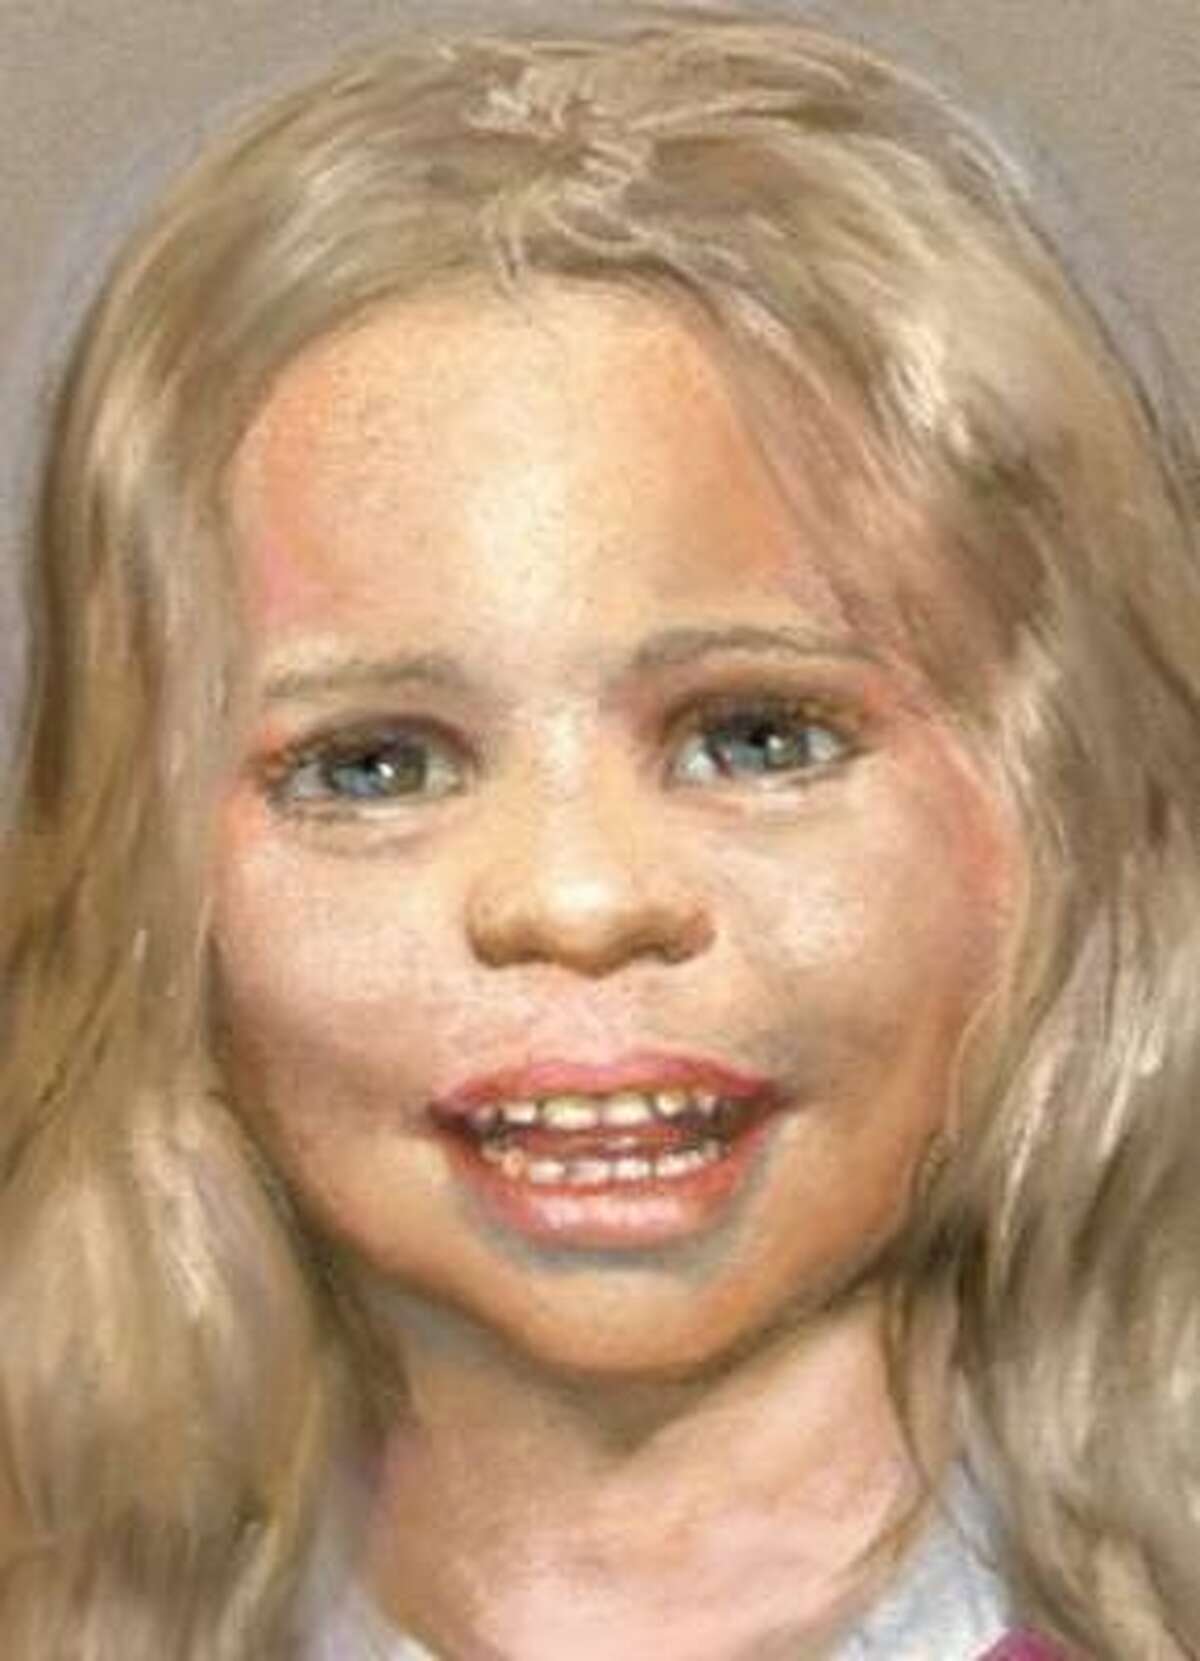 A sketch of Baby Grace. A fisherman found the girl late Monday, Oct. 29. Her body was inside a blue plastic utility box that washed ashore along the Intercoastal Waterway.